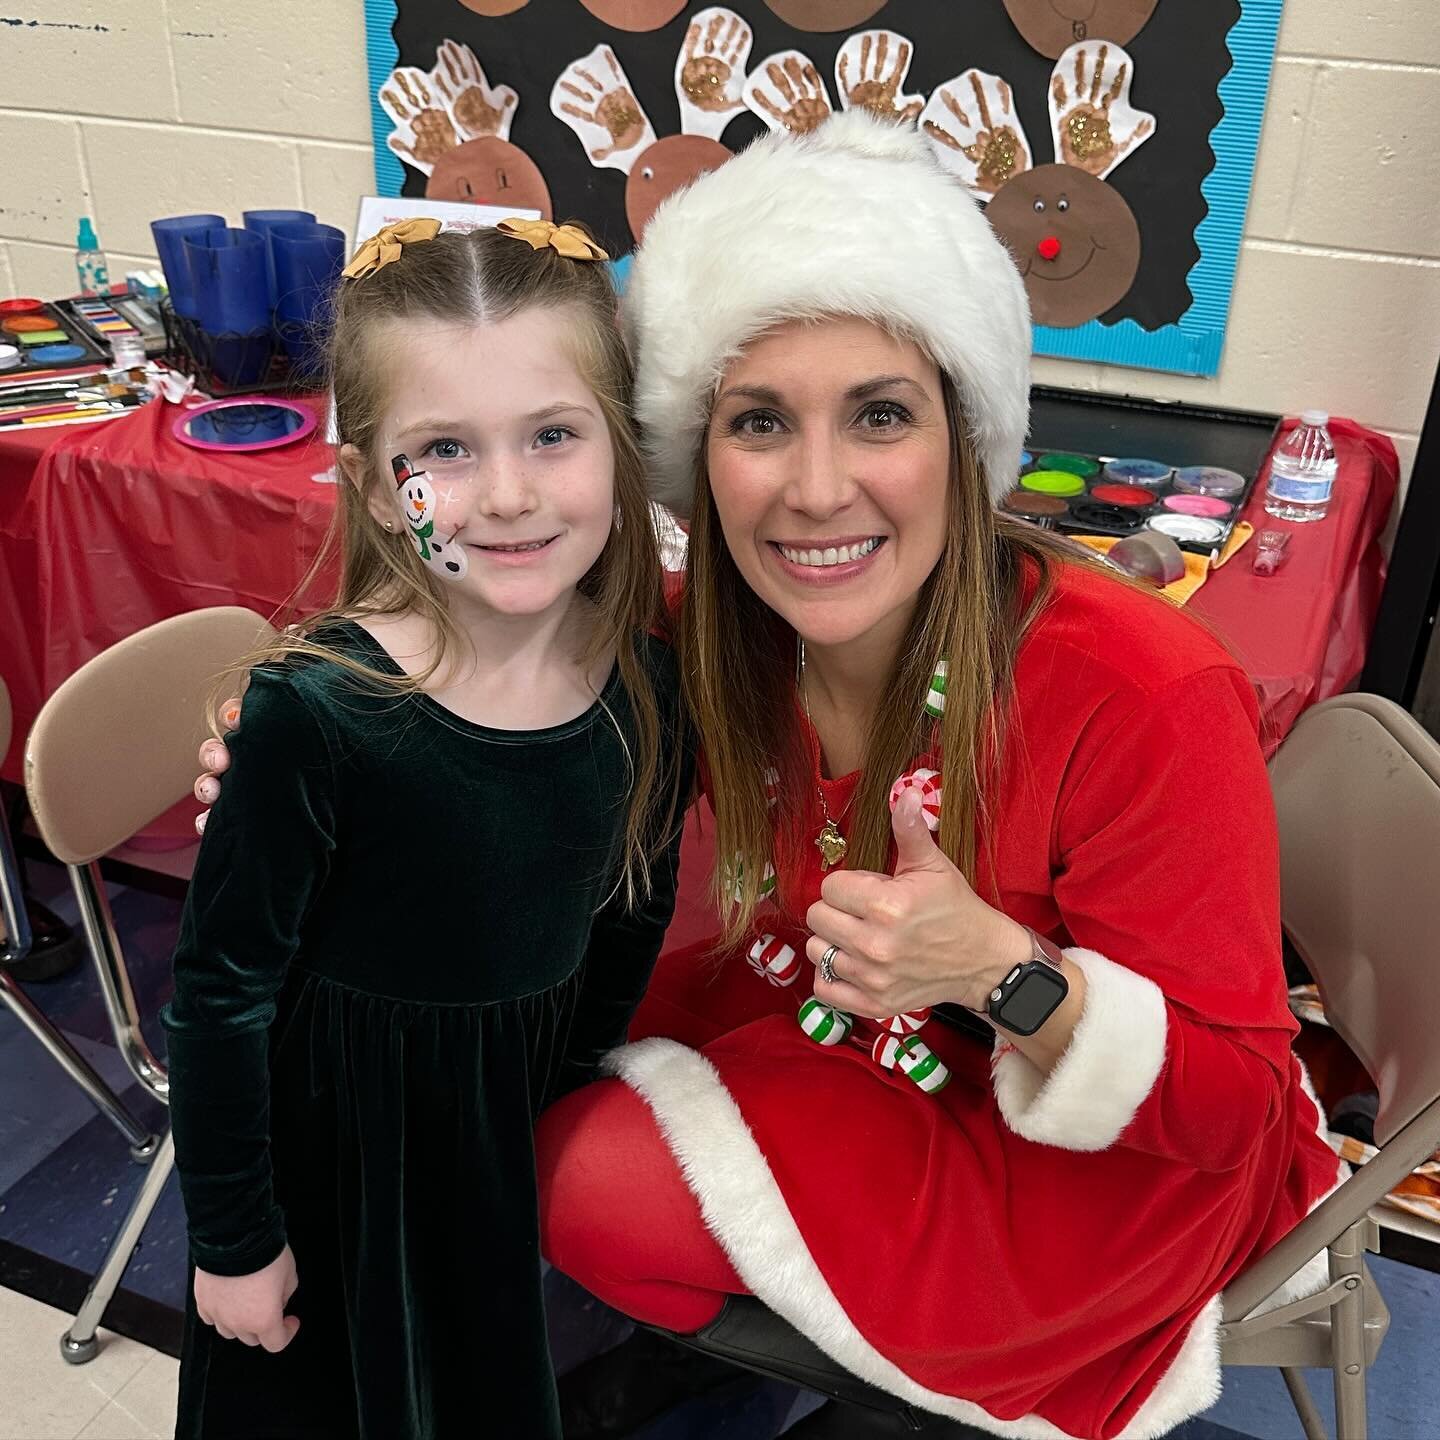 Yesterday&rsquo;s face painting fun at Whitehall Elementary School. ❤️💚🎄

#facepaint #facepainting #facepainter #southnjfacepainter #partyentertainer #southnjentertainer #bestofgloucestercou nty